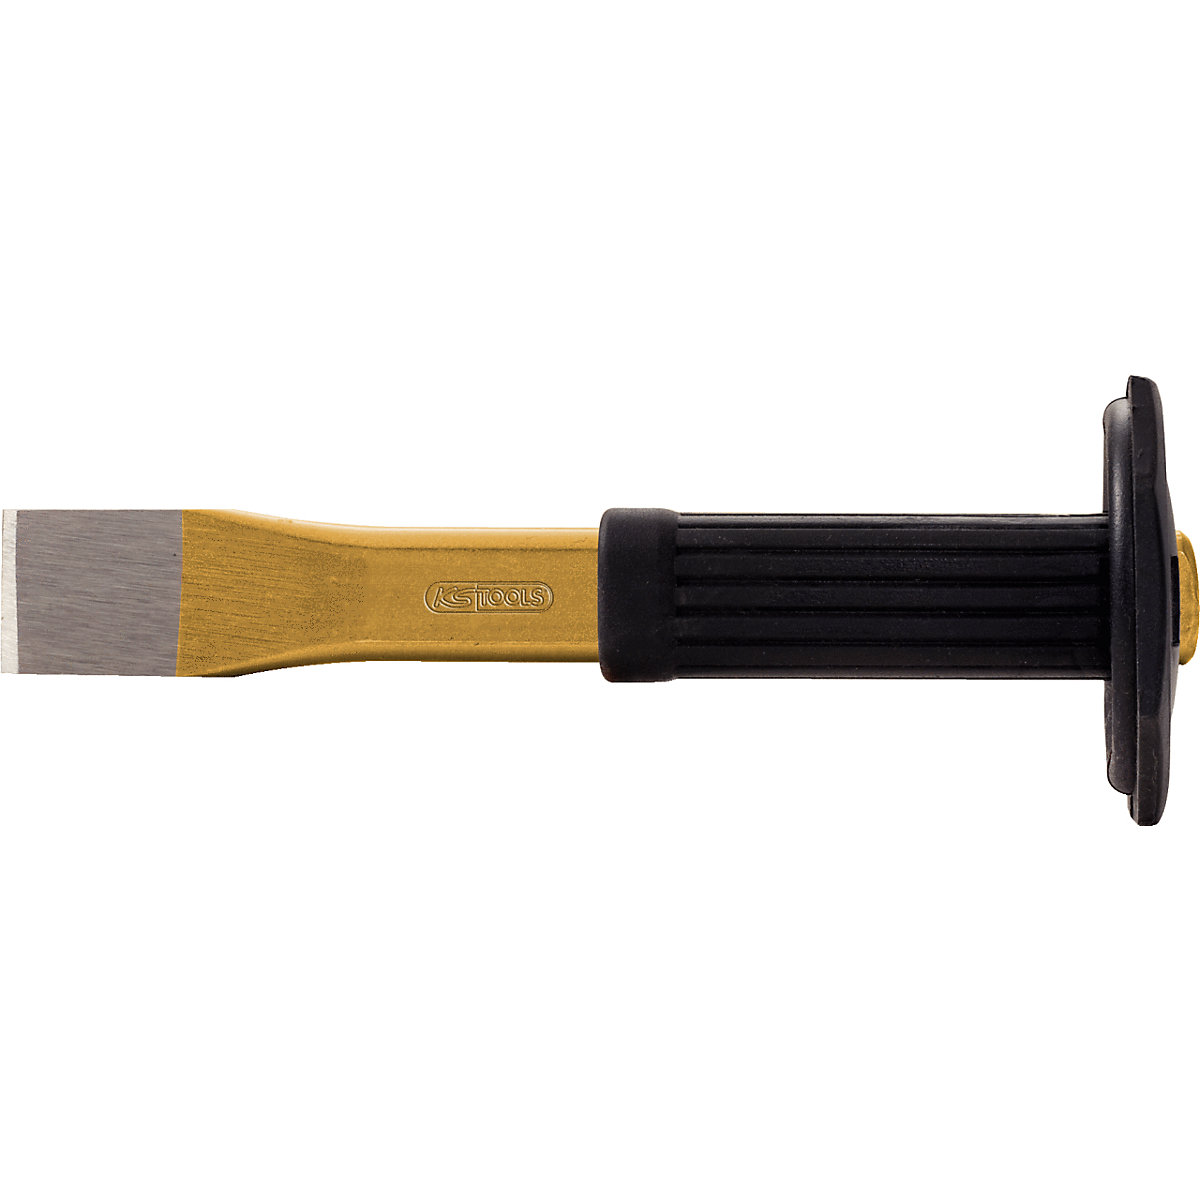 Flat chisel with hand protection grip - KS Tools